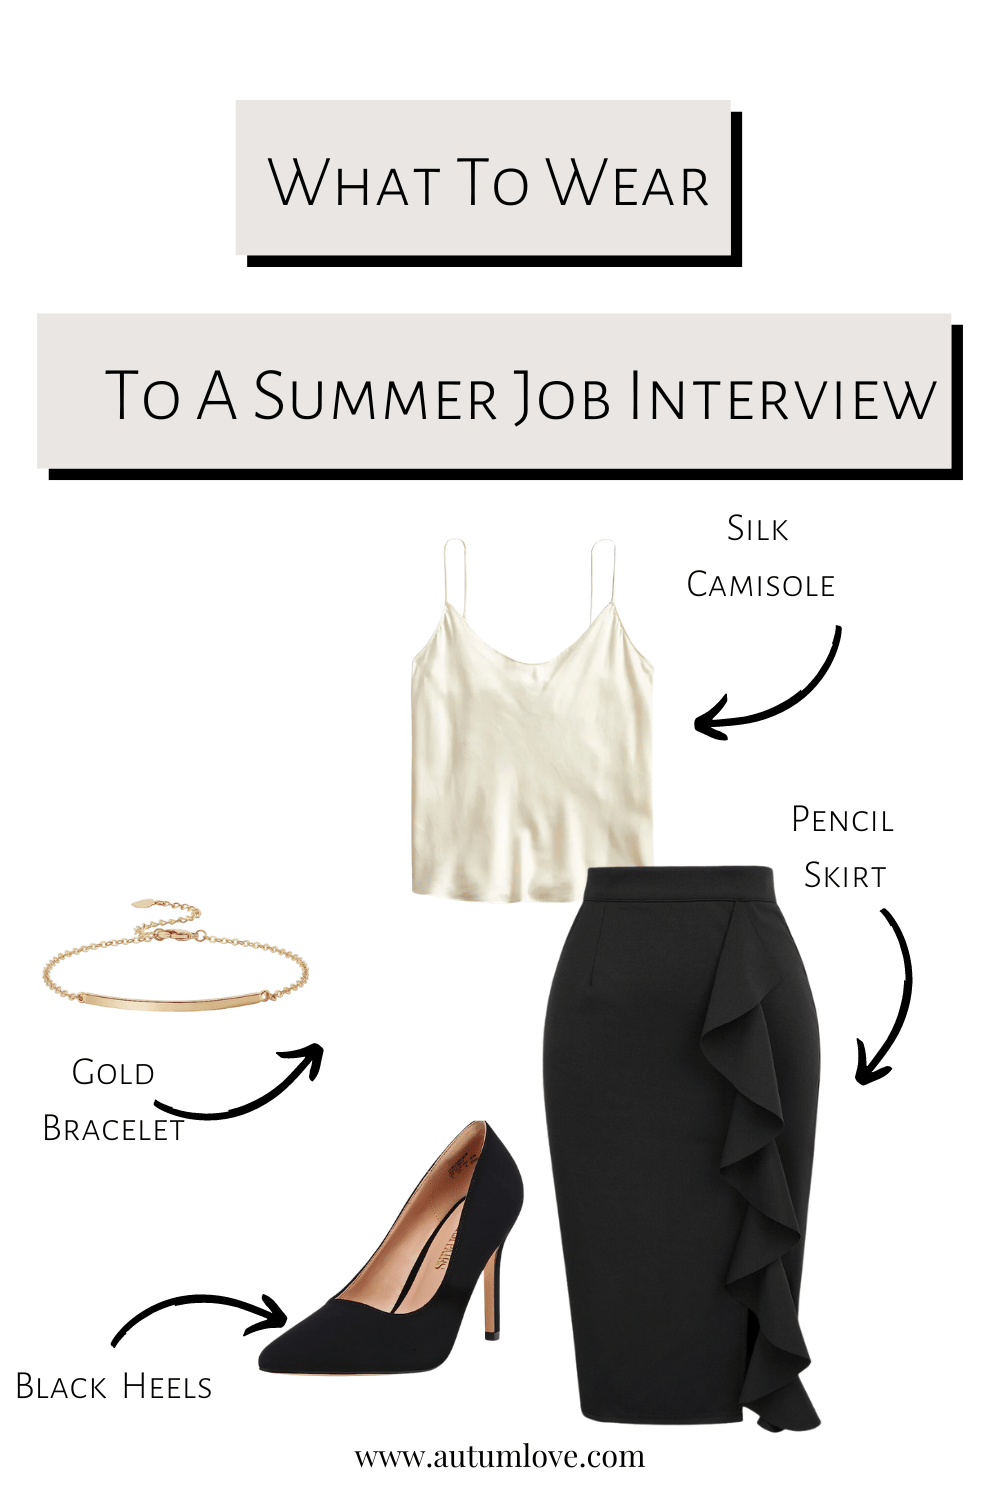 Ace Your Interview With These 5 Summer Outfit Ideas